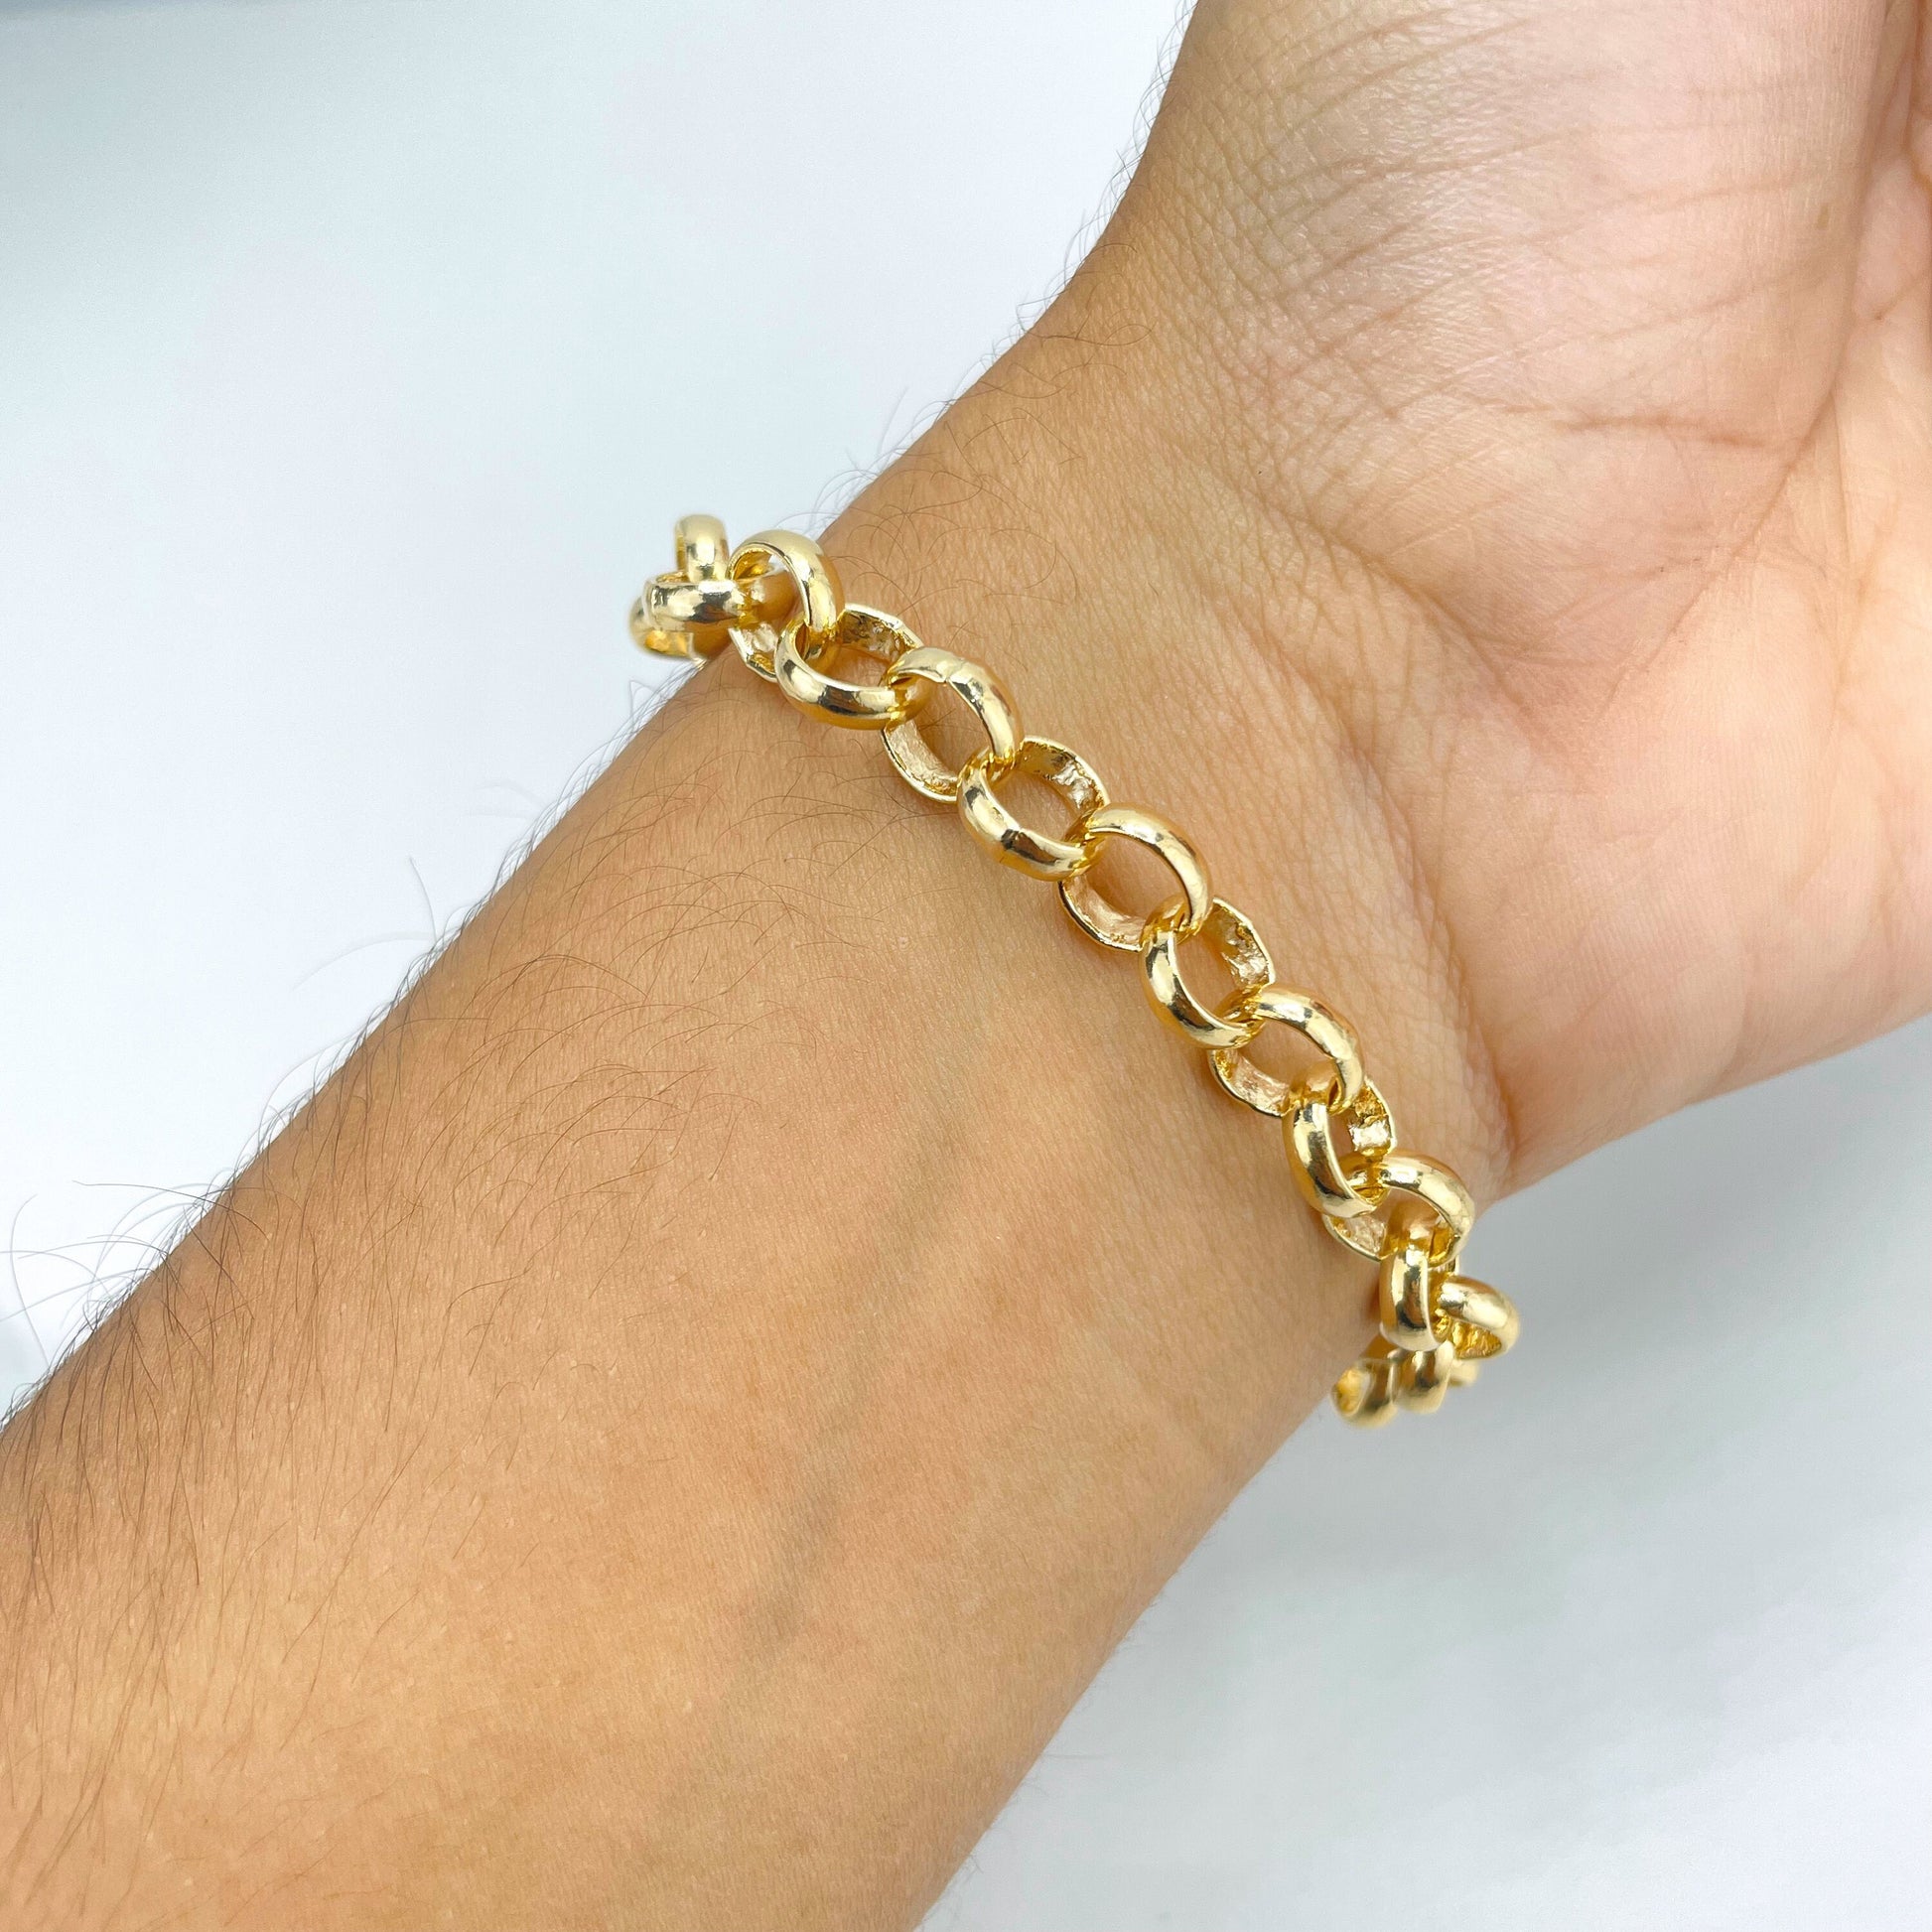 18k Gold Filled 8mm Specialty Puff Puffed Mariner Link Chain or Bracelet , Wholesale Jewelry Making Supplies